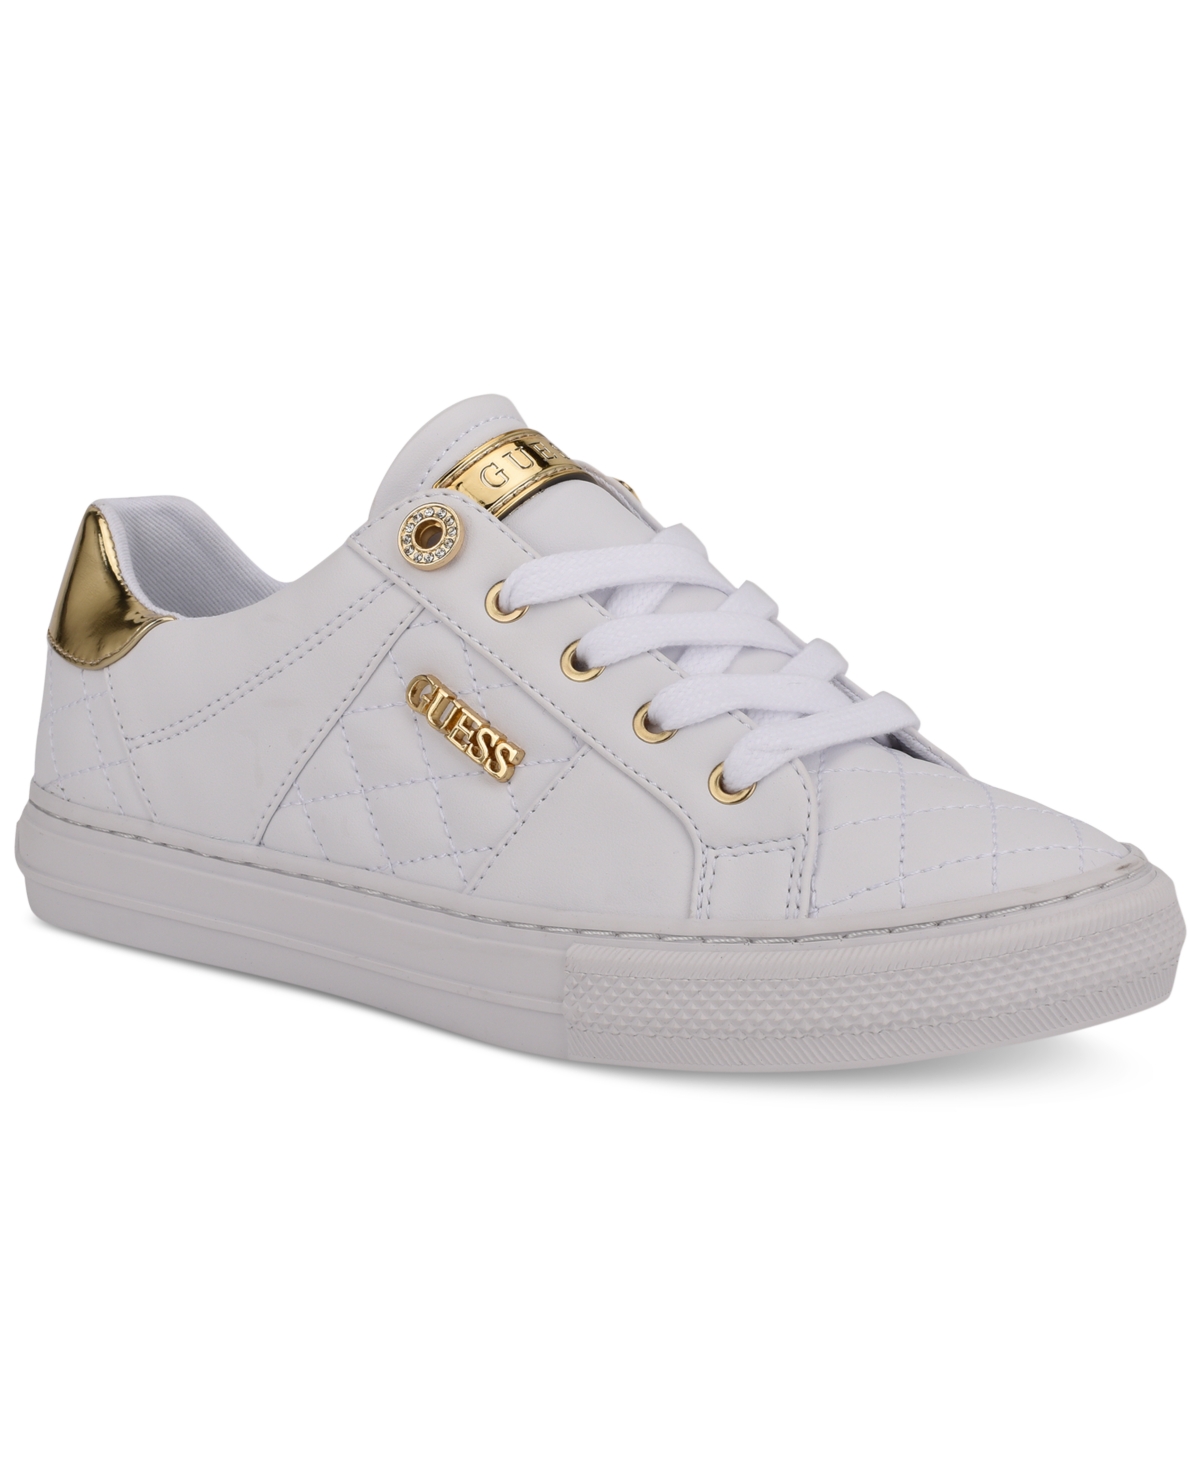 Women's Loven Lace-Up Sneakers - Light Natural/Gold Metallic Logo Multi